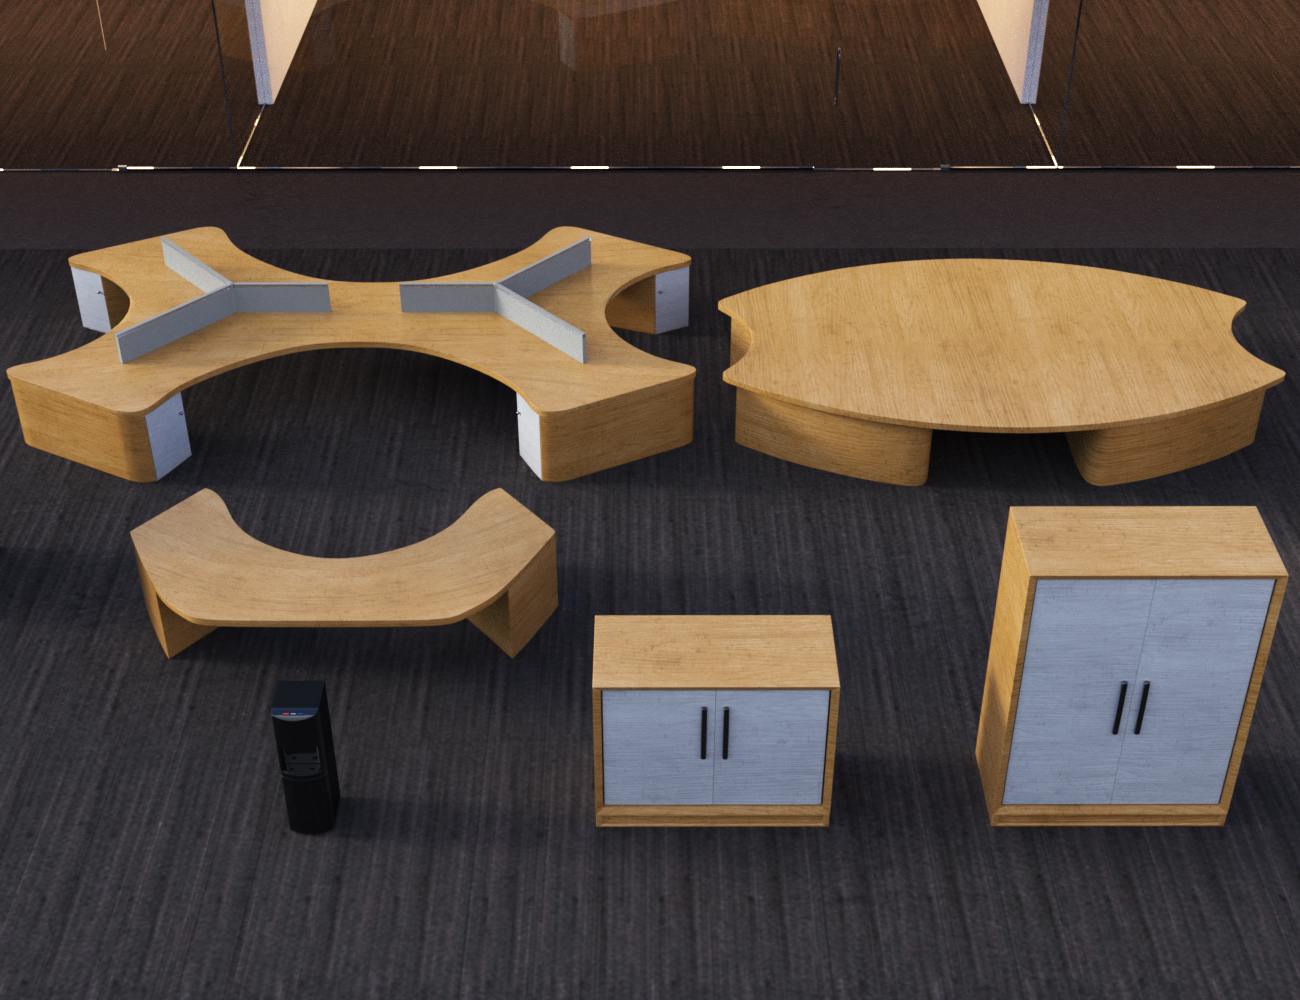 Modern Office Space by: Charlie, 3D Models by Daz 3D